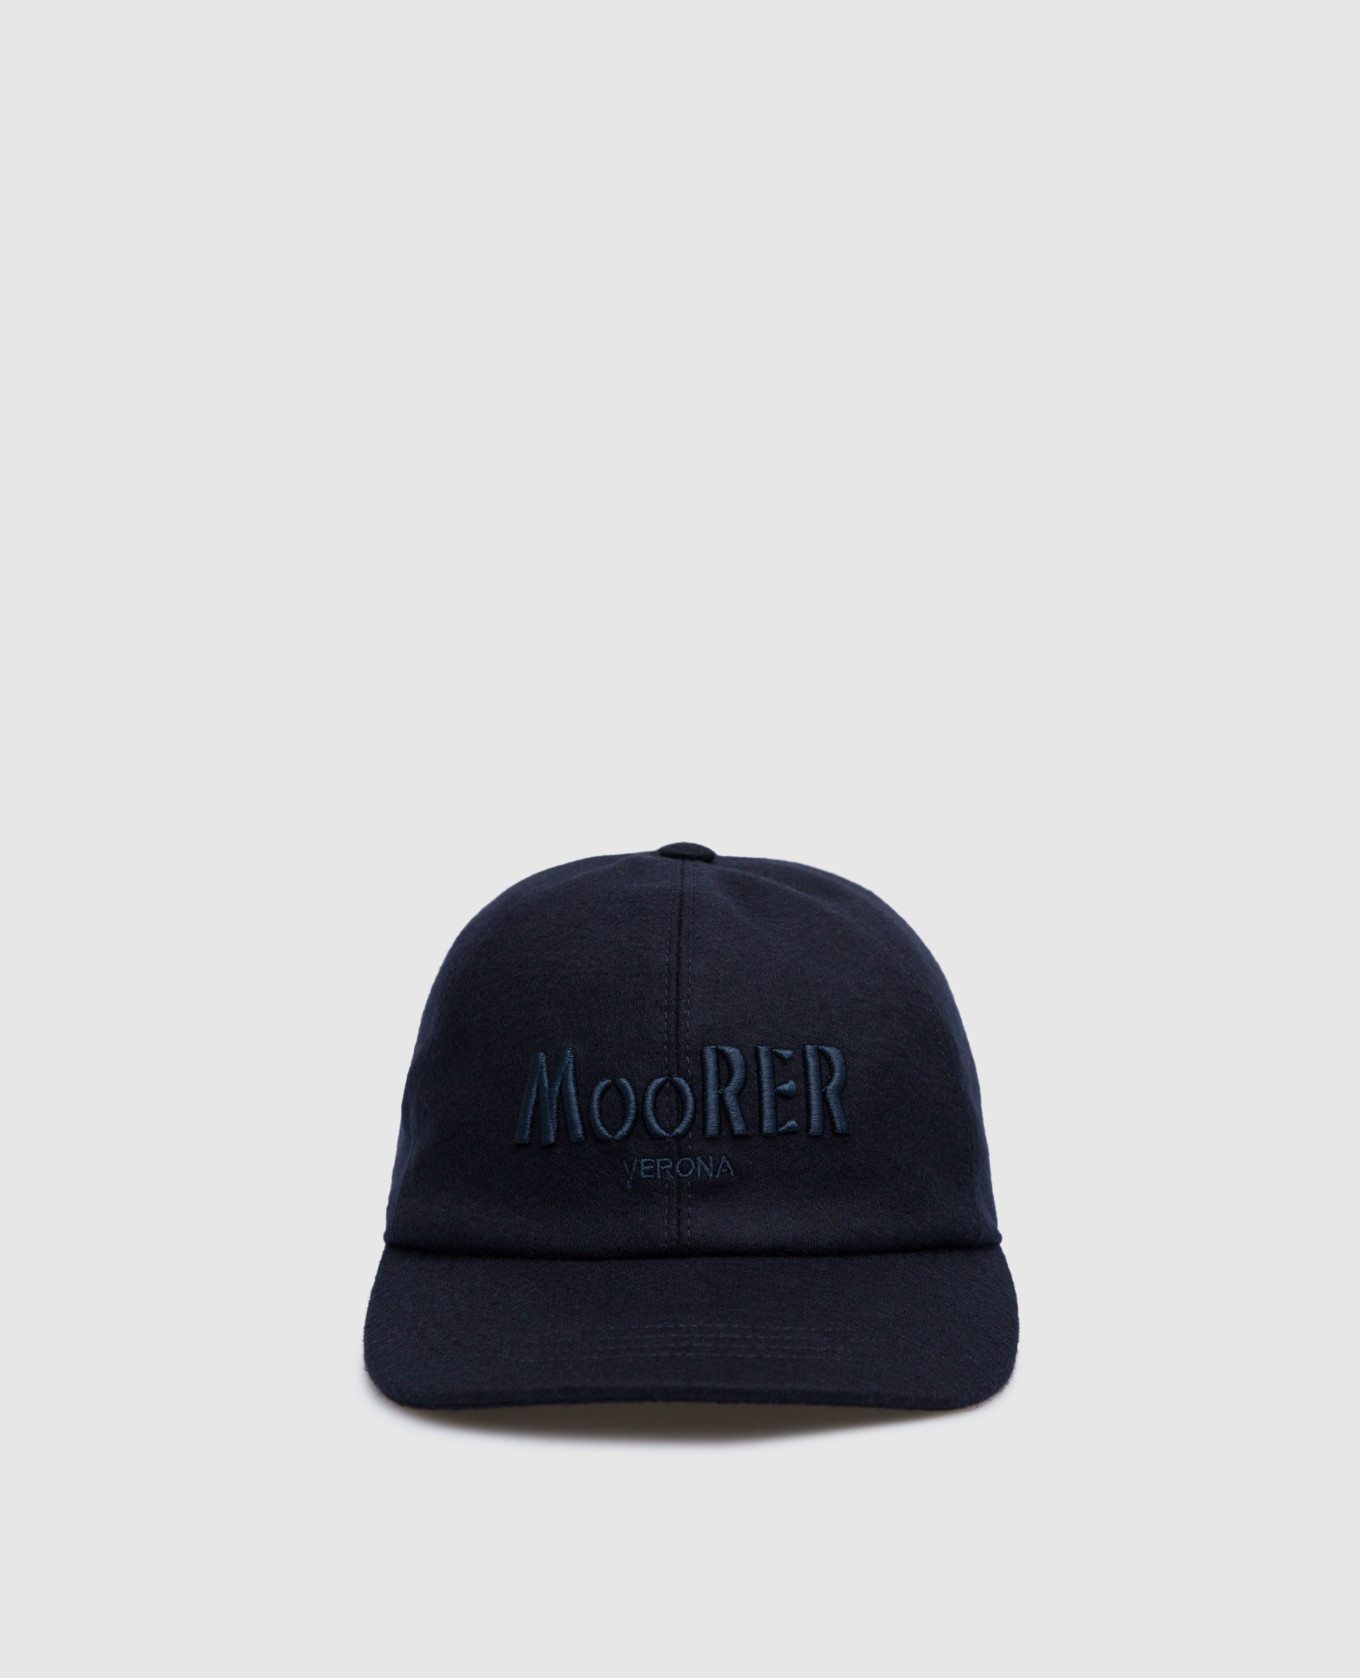 Robinson cap in navy wool with logo embroidery